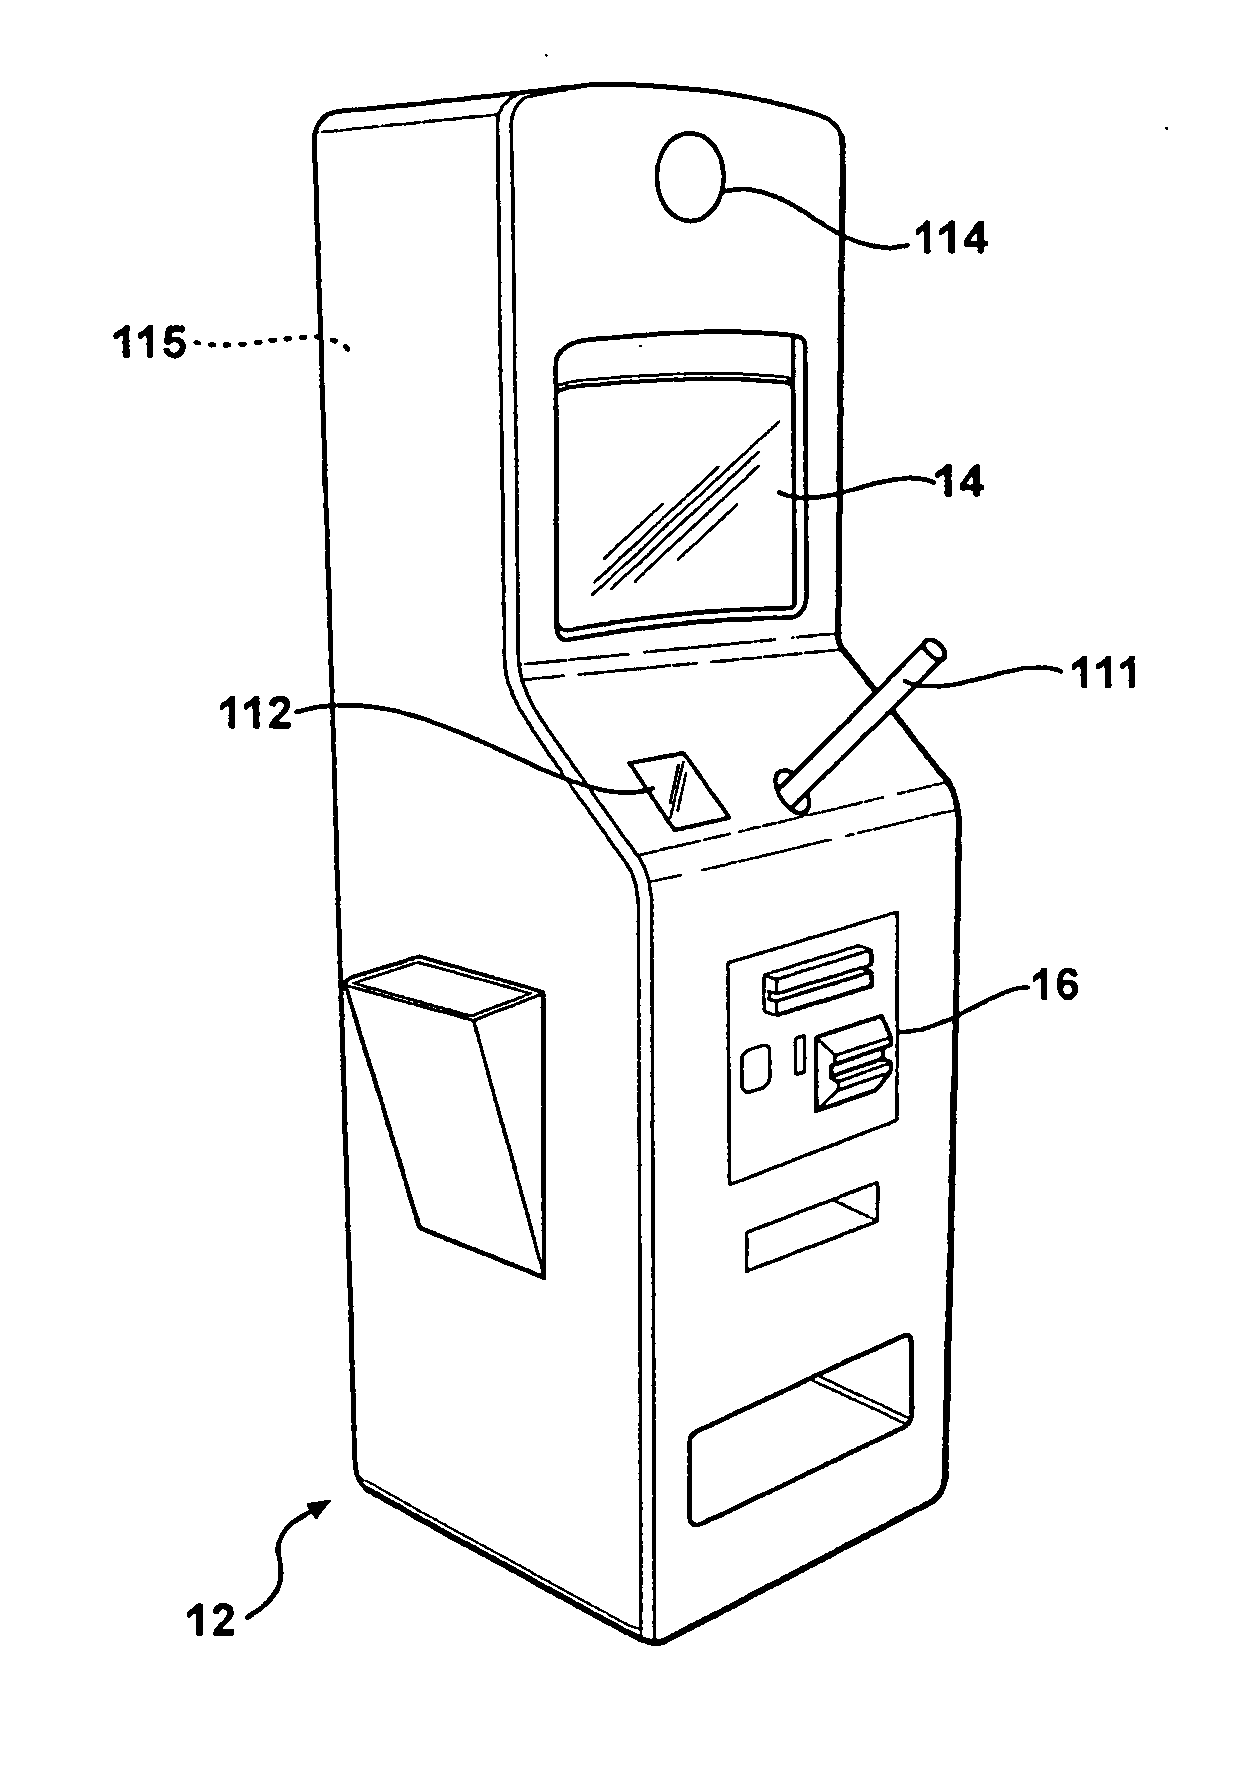 Method and apparatus for a self-service kiosk system for collecting and reporting blood alcohol level